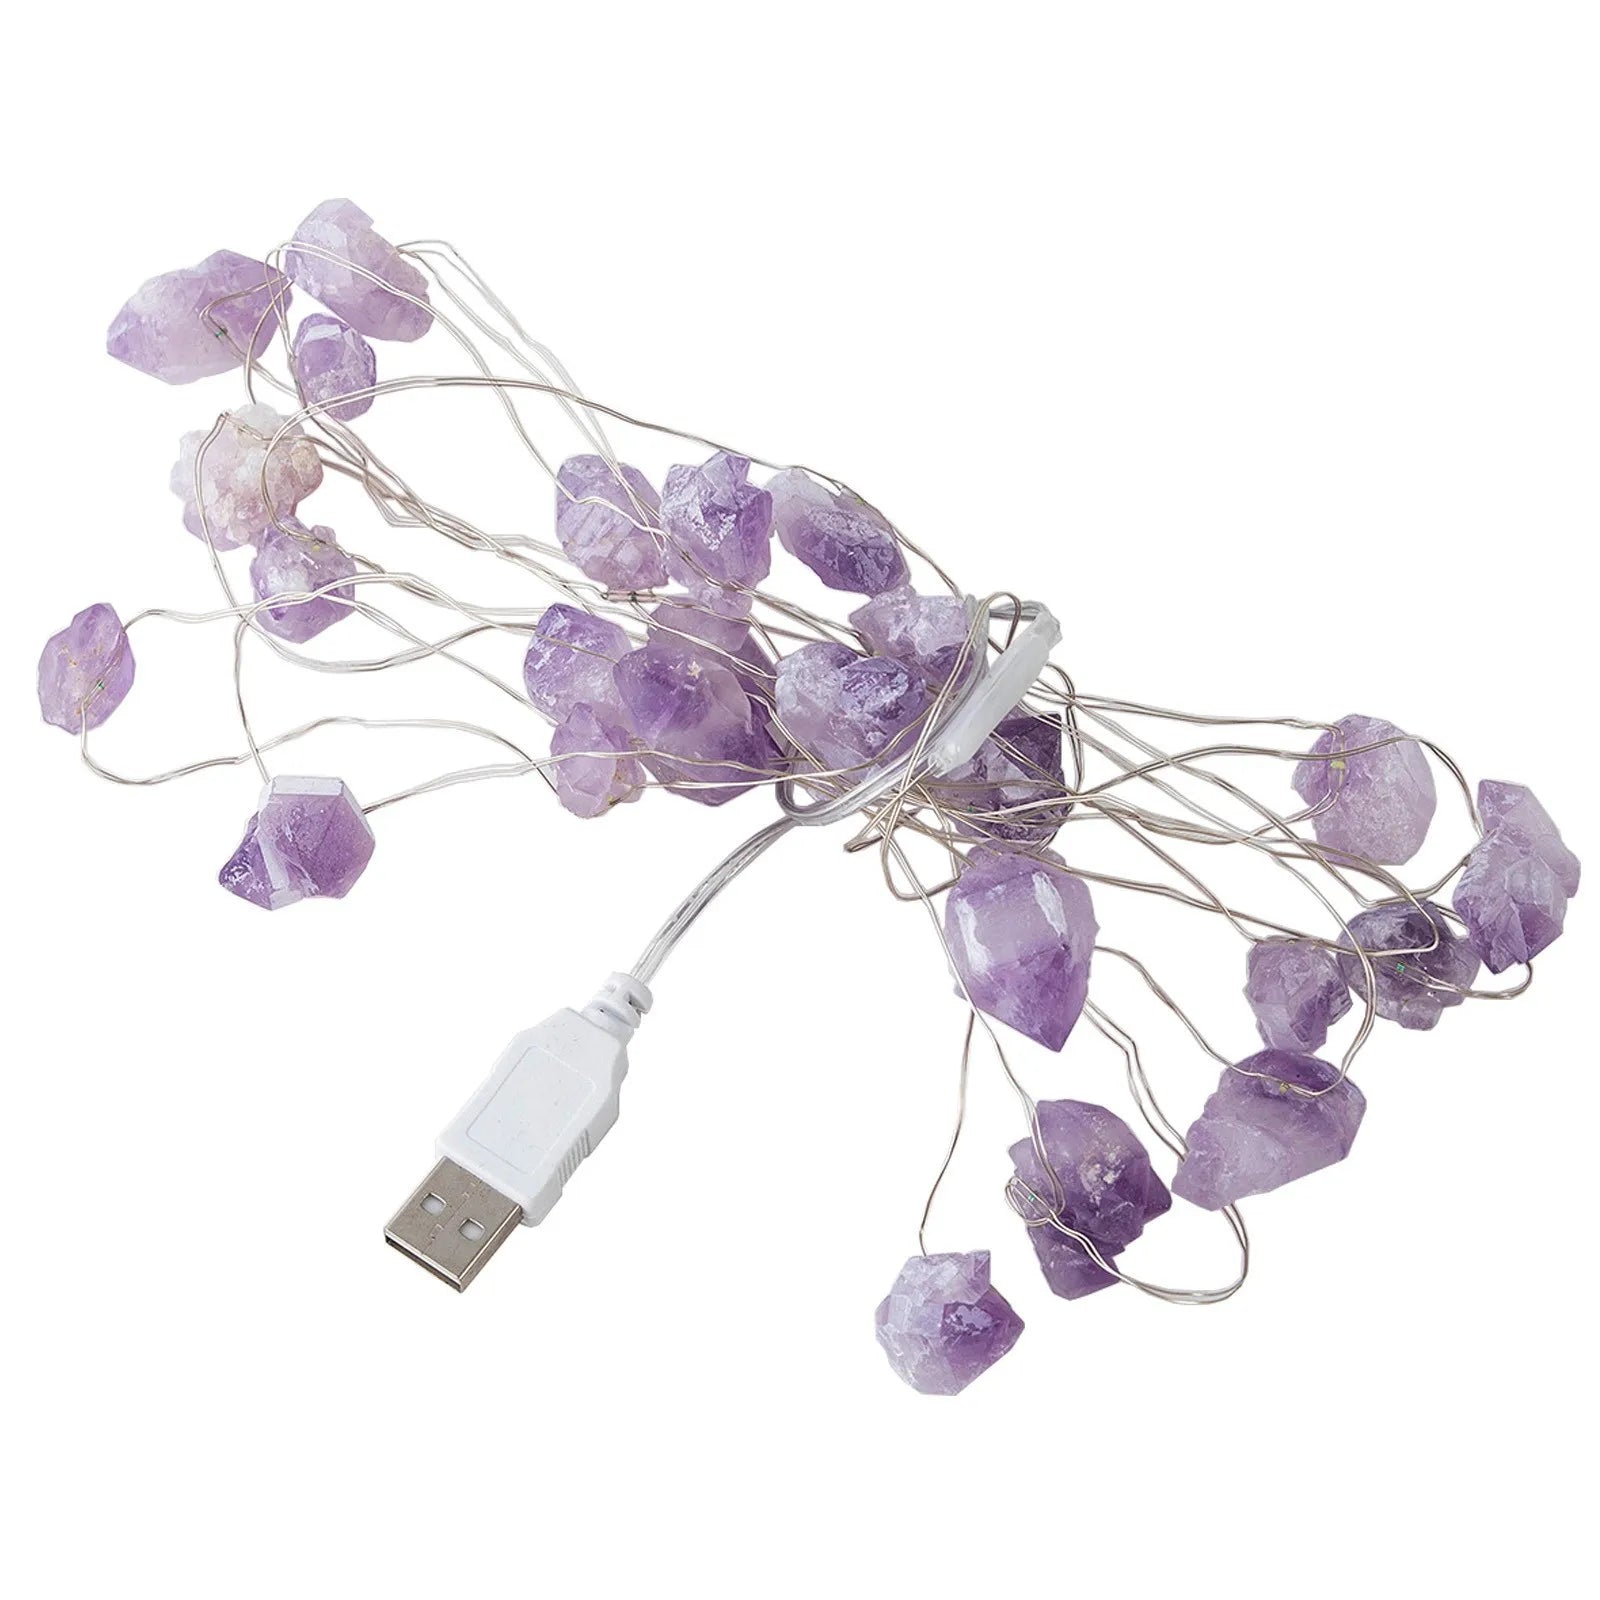 Natural Amethyst Crystal Decorative Fairy Lights - USB Powered - Conscious Shopping